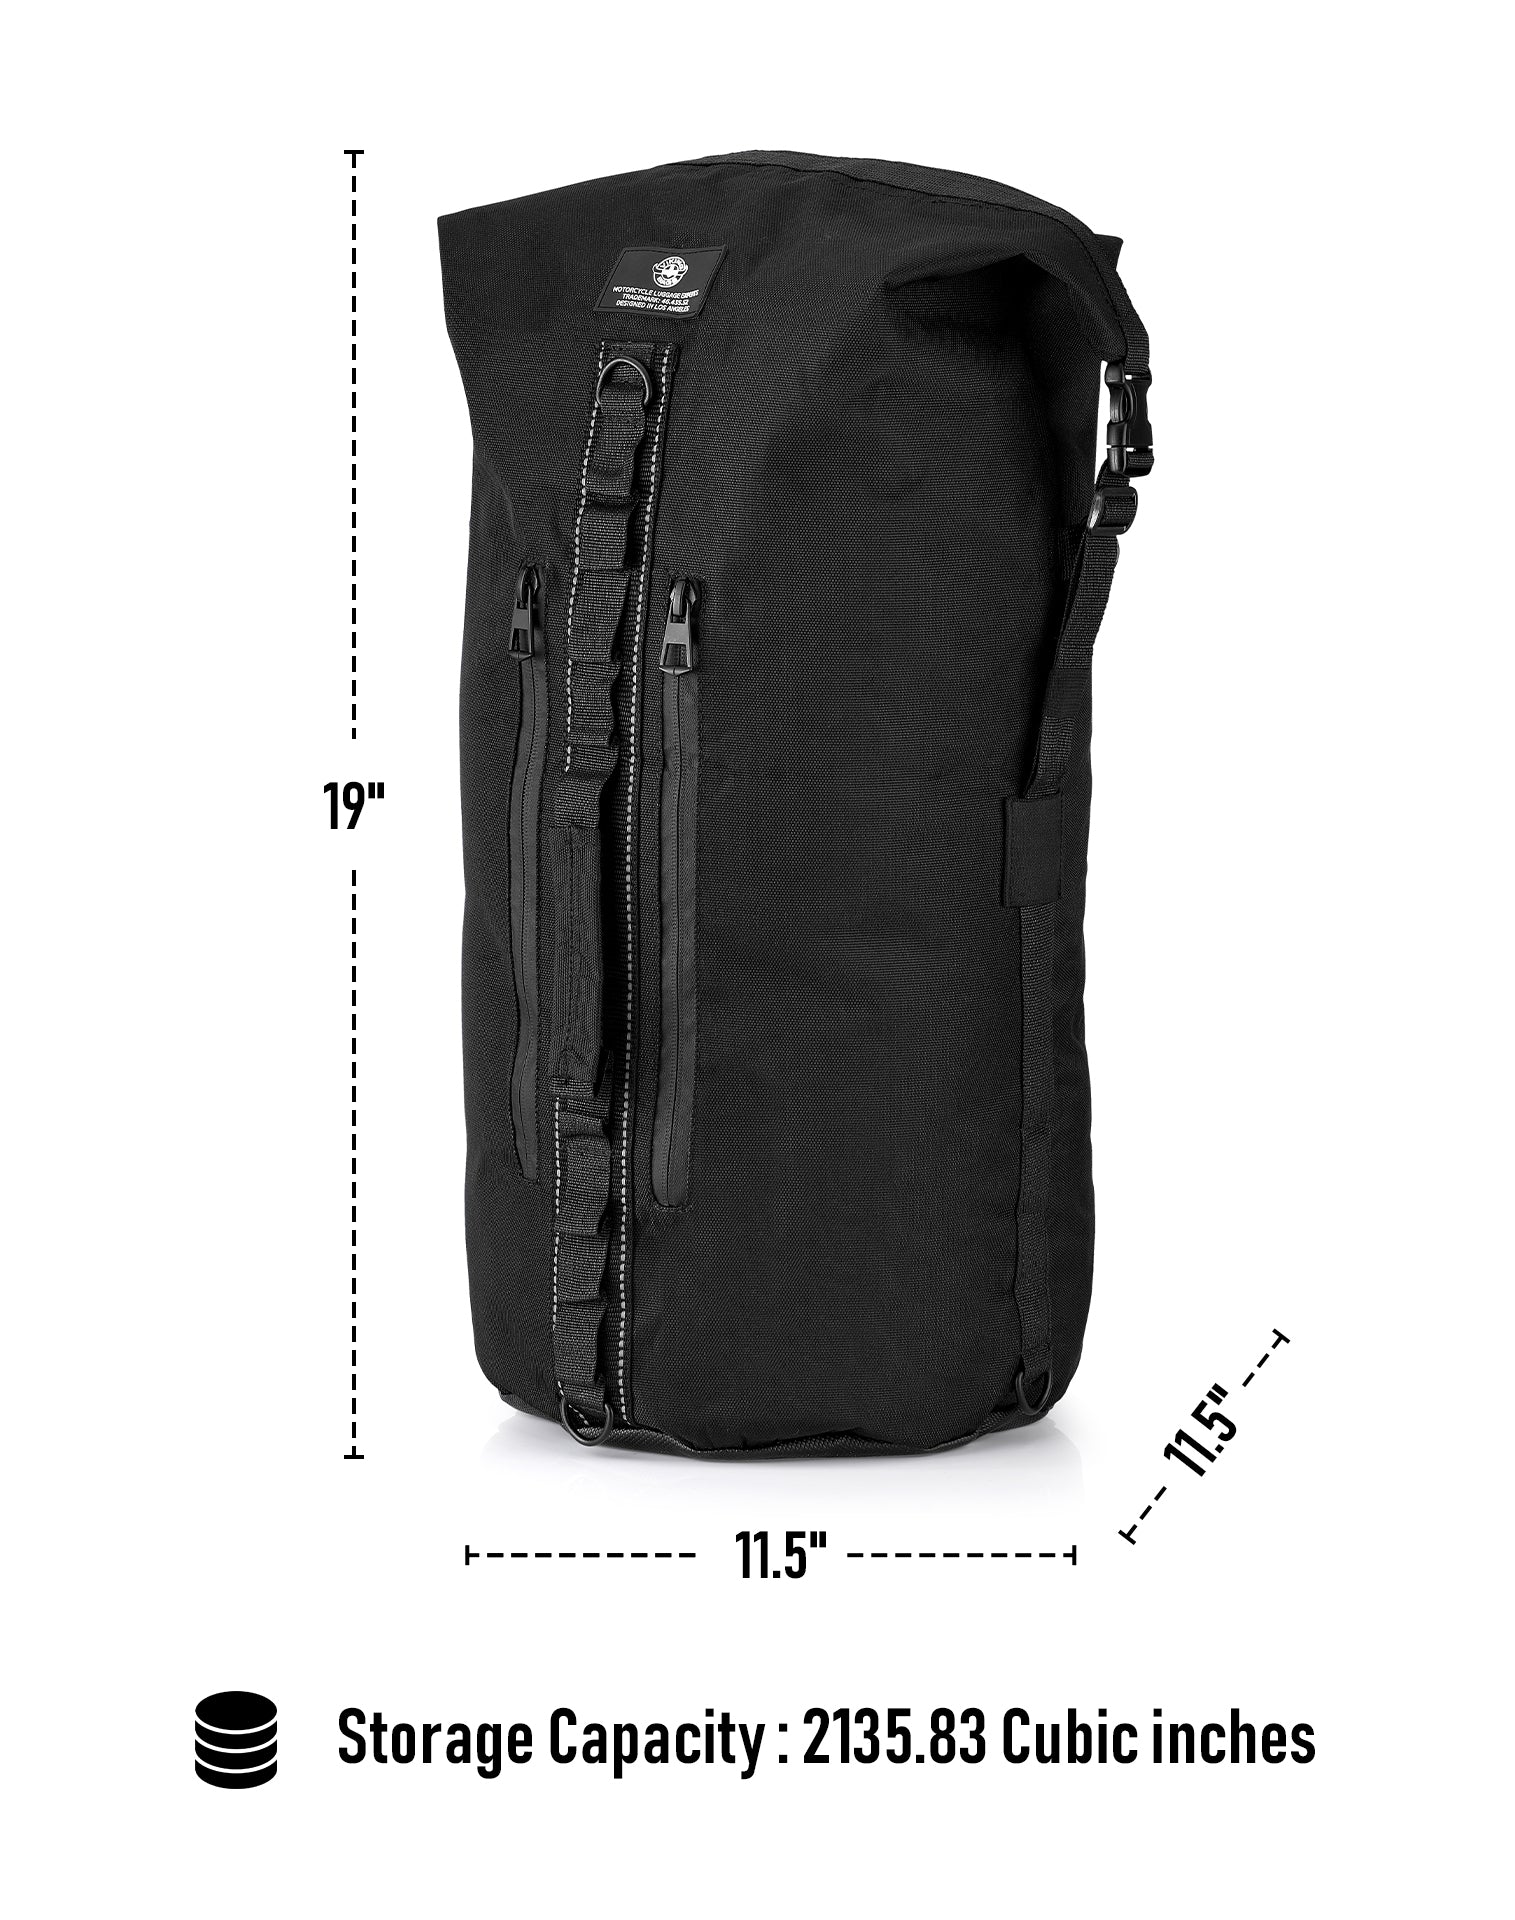 35L - Renegade Large Hyosung Motorcycle Dry Backpack